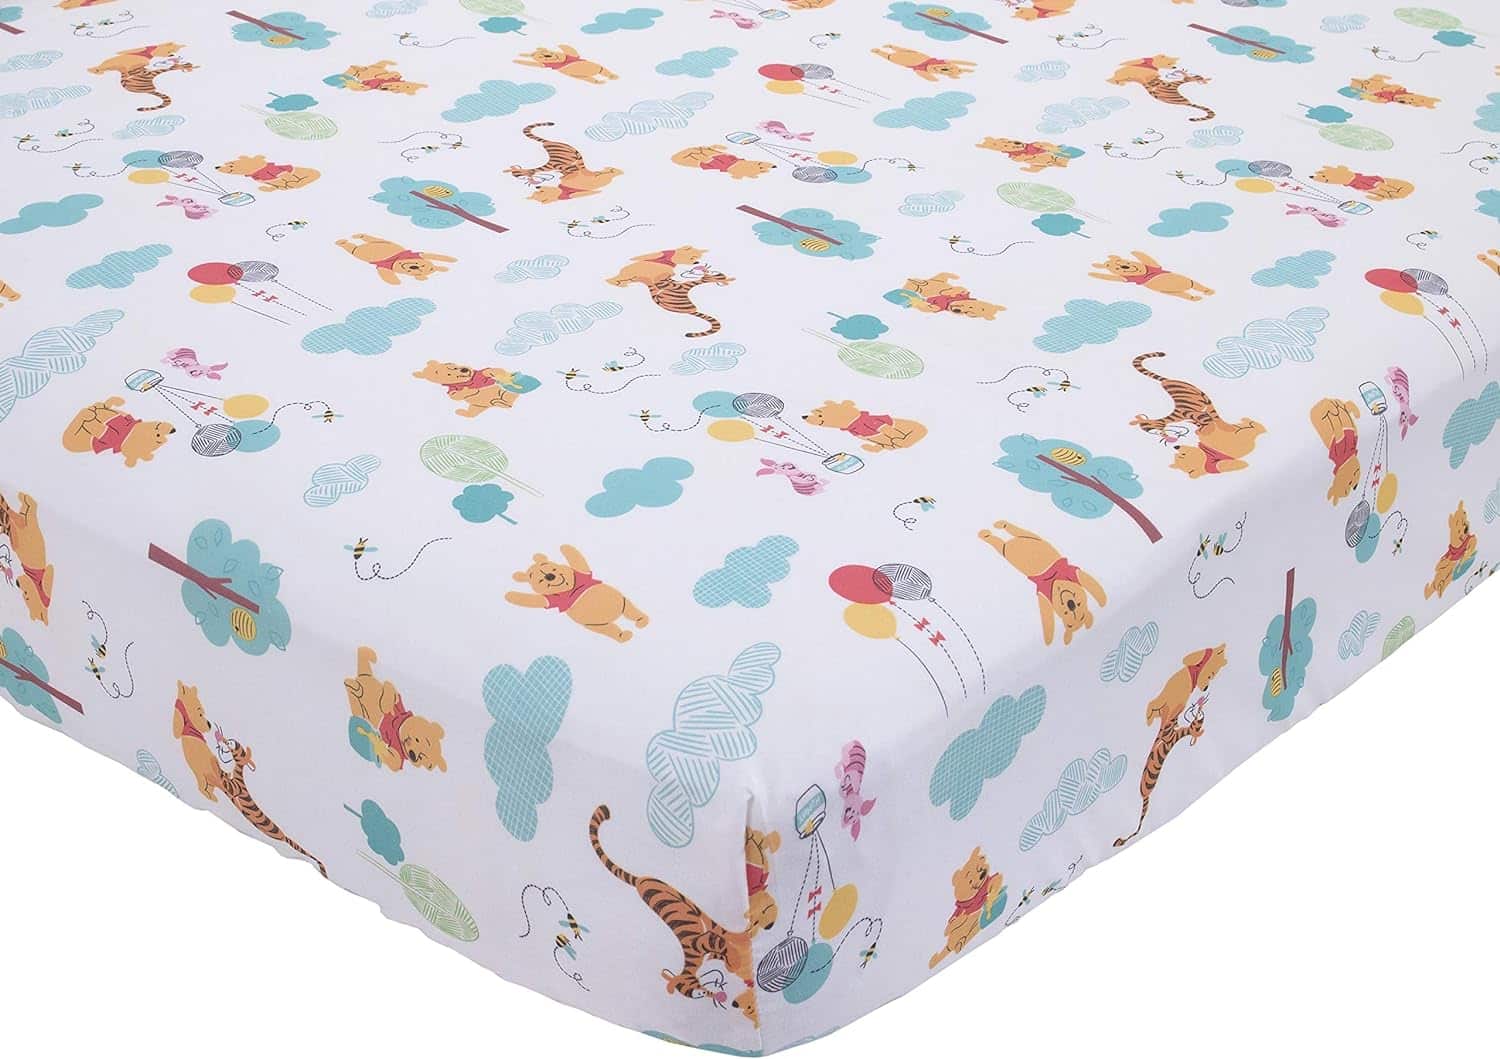 Disney's Winnie The Pooh First Best Friend 4 Piece Nursery Crib Bedding Set: A Whimsical Journey to the Hundred Acre Woods